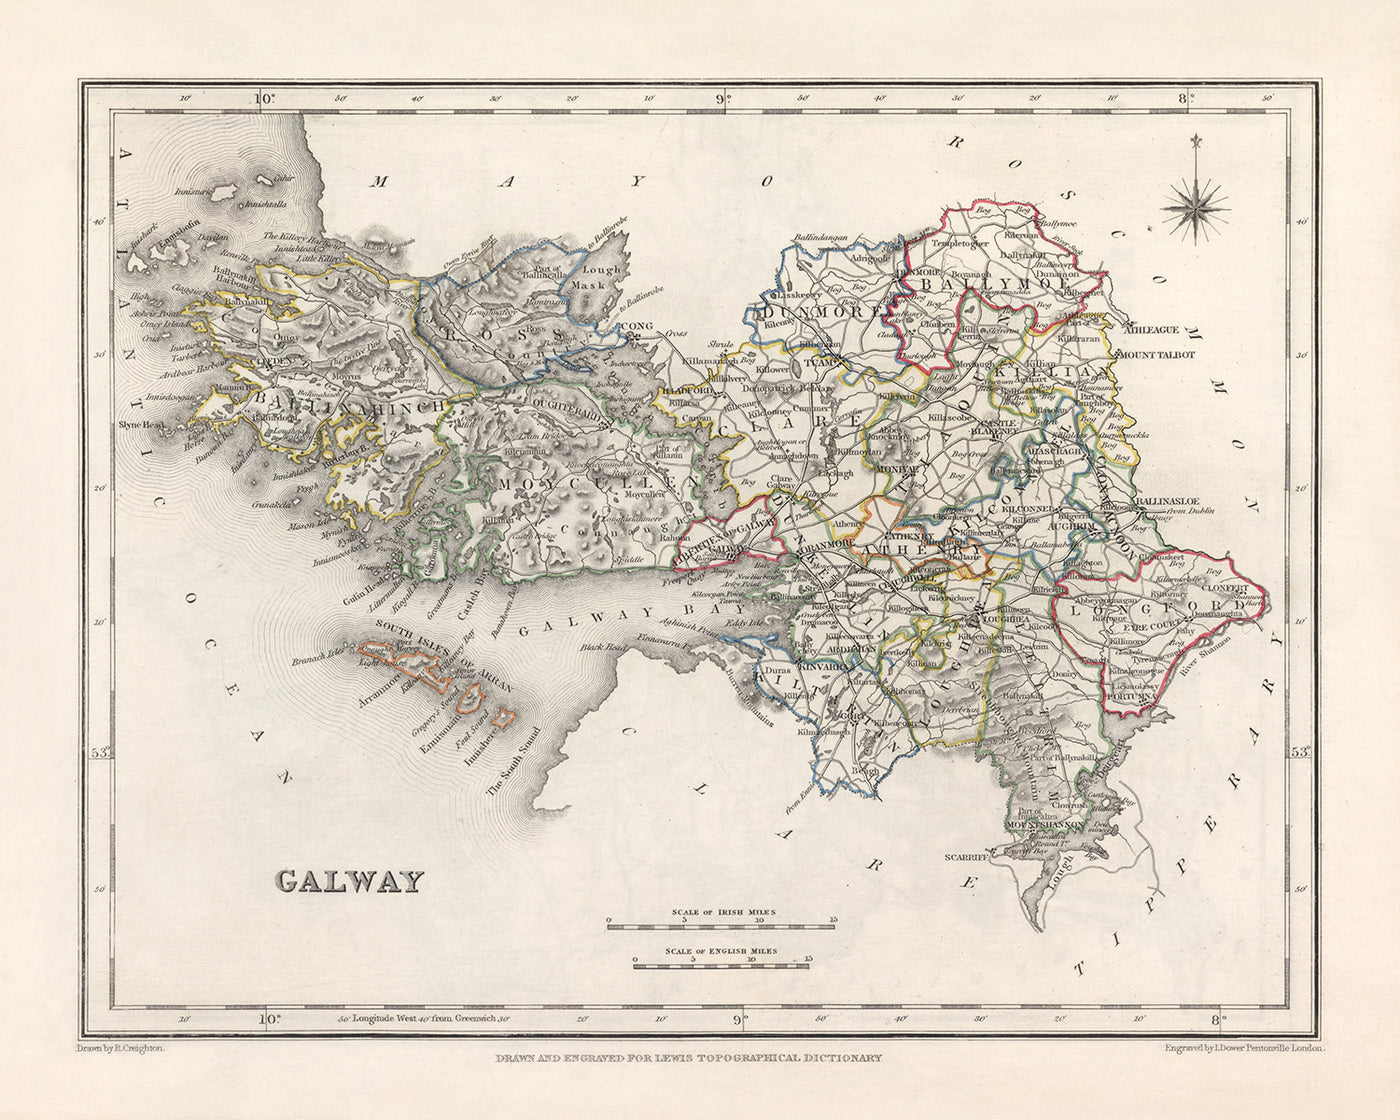 Old Map of County Galway by Samuel Lewis, 1844: Athenry, Ballinasloe, Clifden, Gort, Loughrea